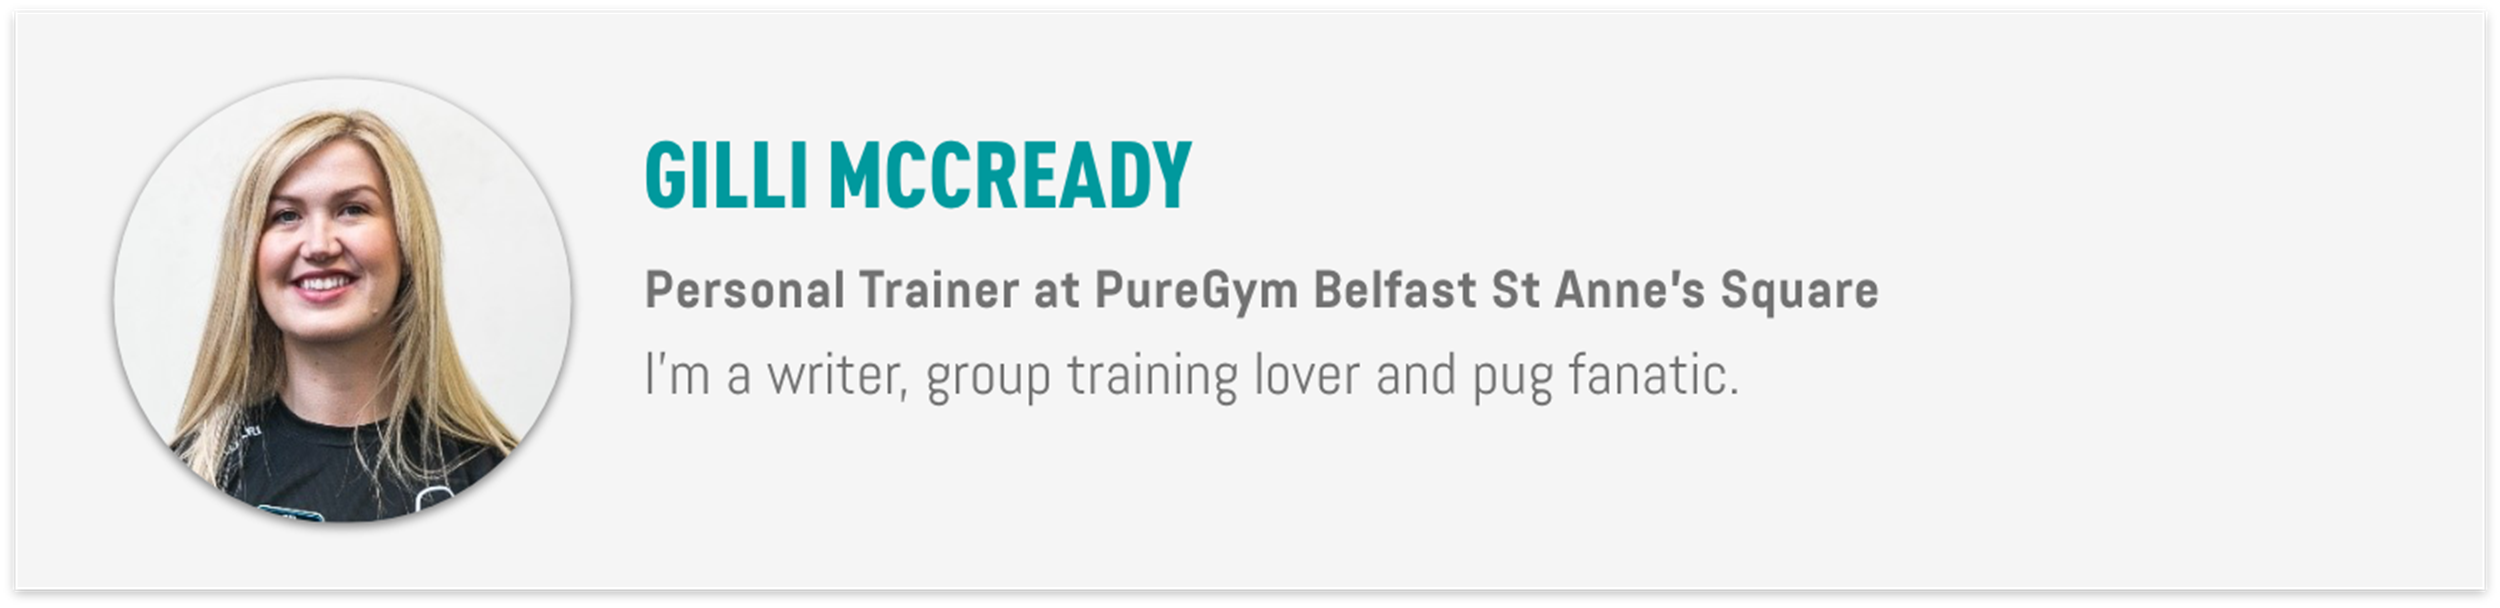 Gilli Mccready is a personal trainer at PureGym Belfast St Annes Square